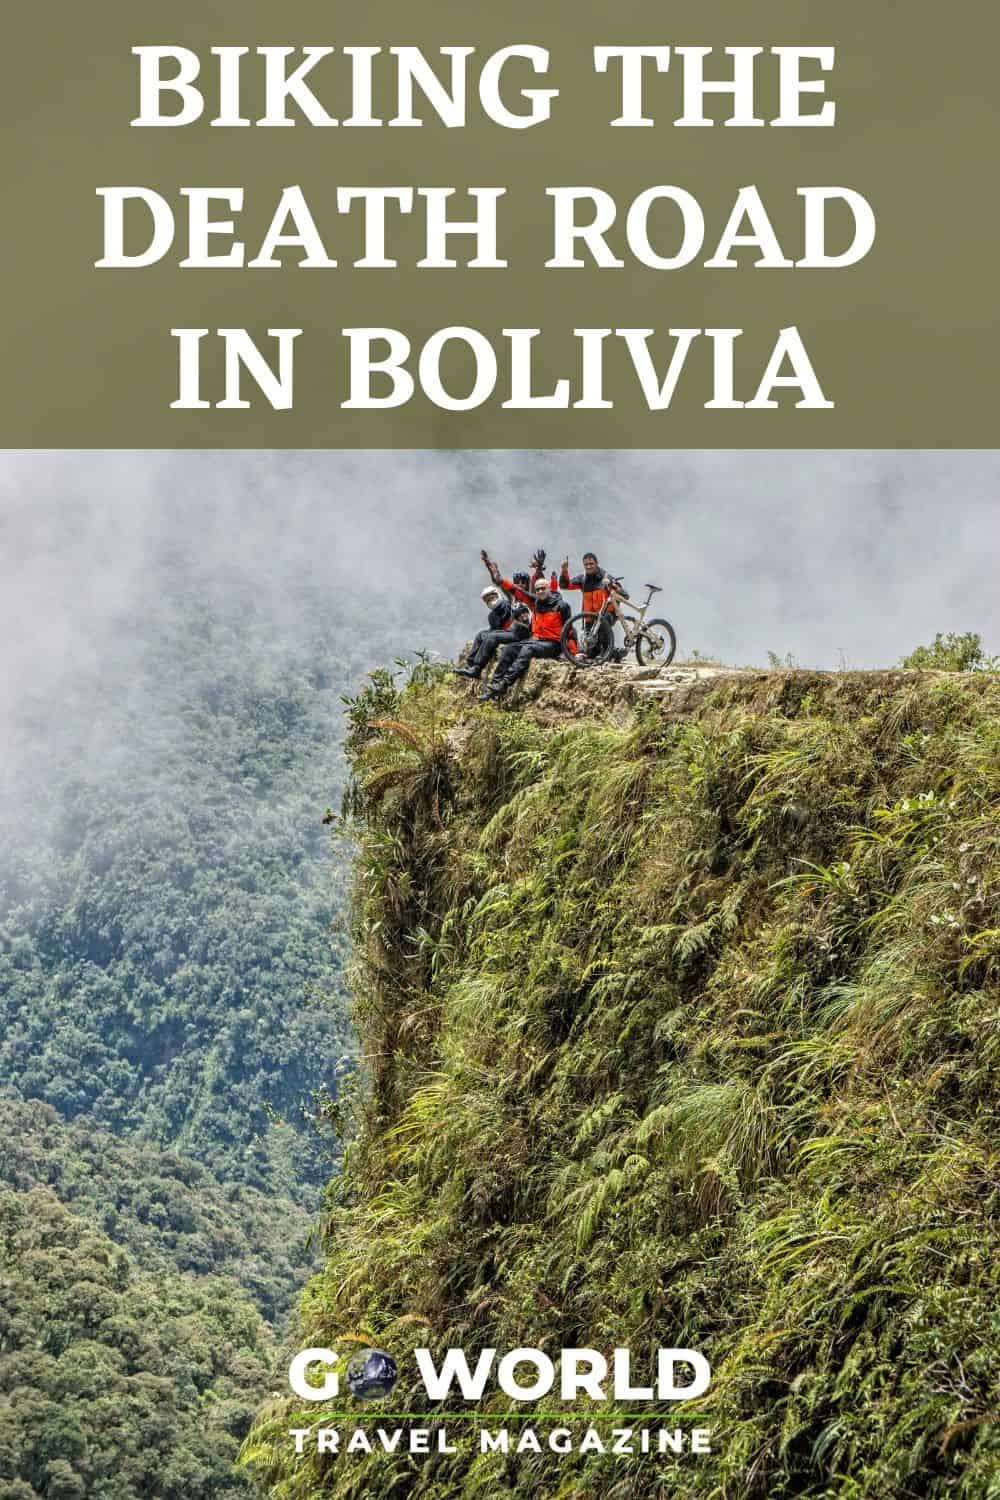 The Death Road in Bolivia has claimed thousands of lives but if you're looking for an epic adrenaline thrill try this Death Road bike tour. #Travelinbolivia #deathroadbolivia #lapazbolivia